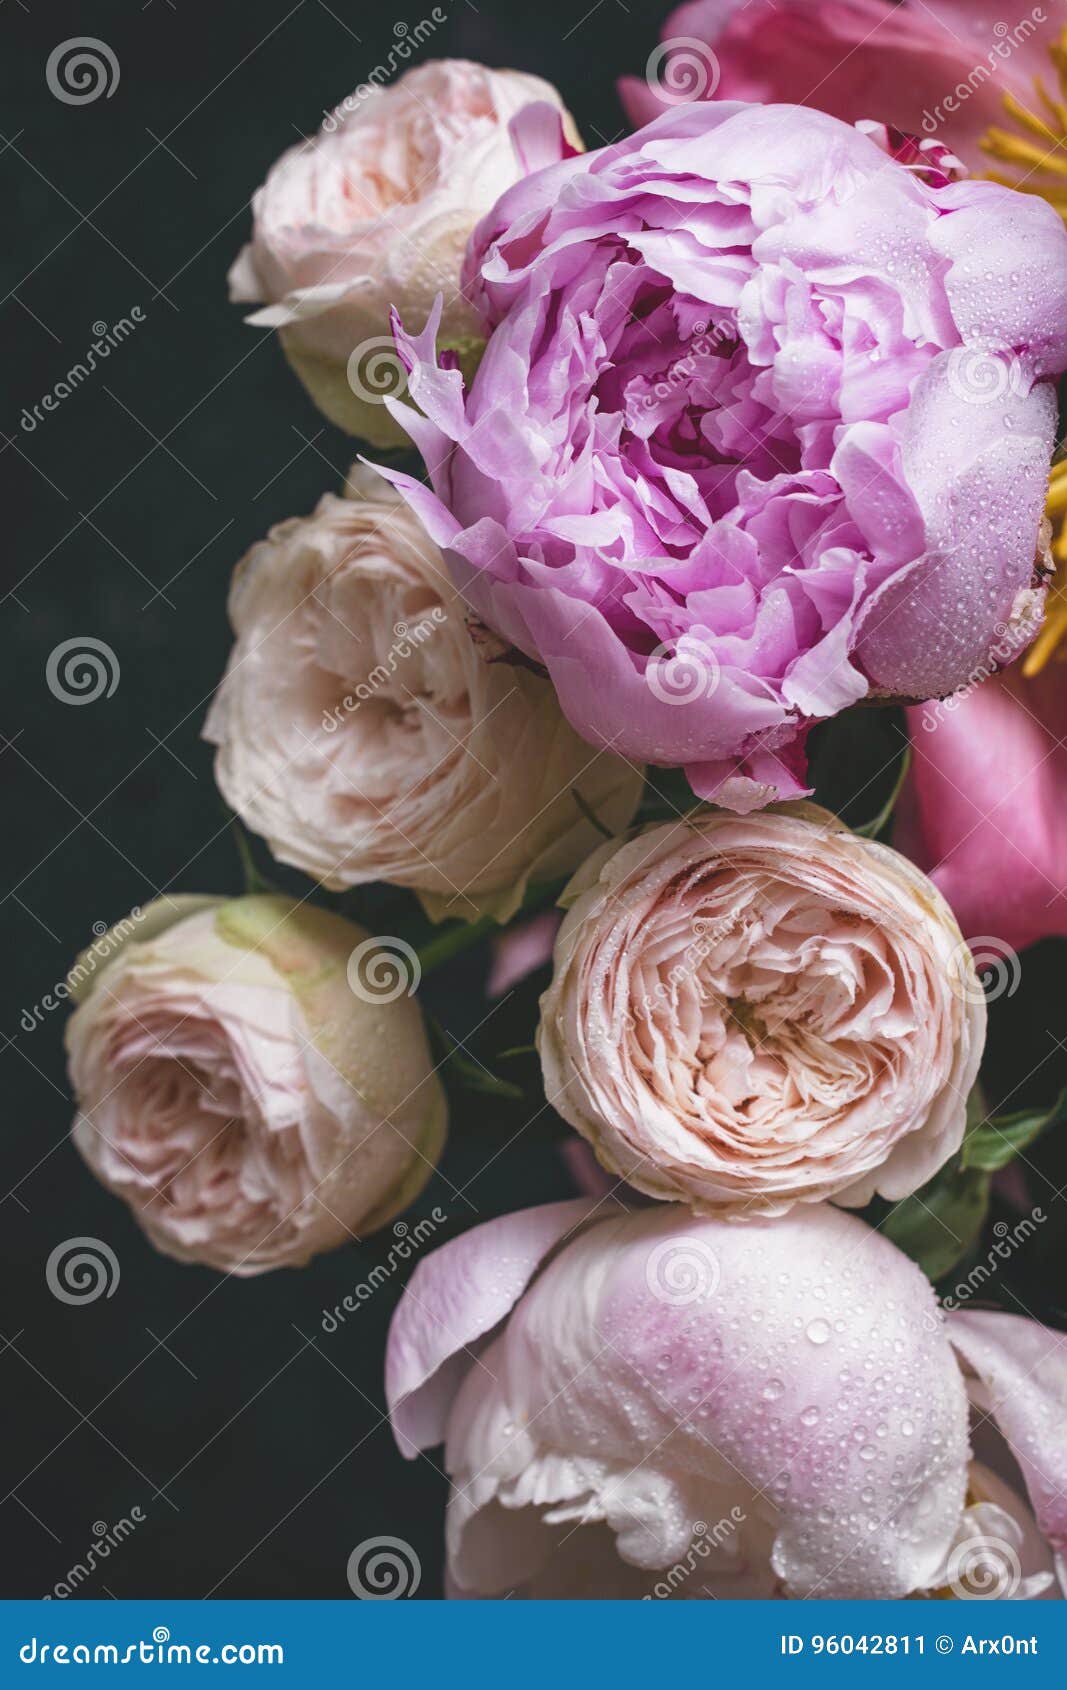 pink roses and peonies bouquet